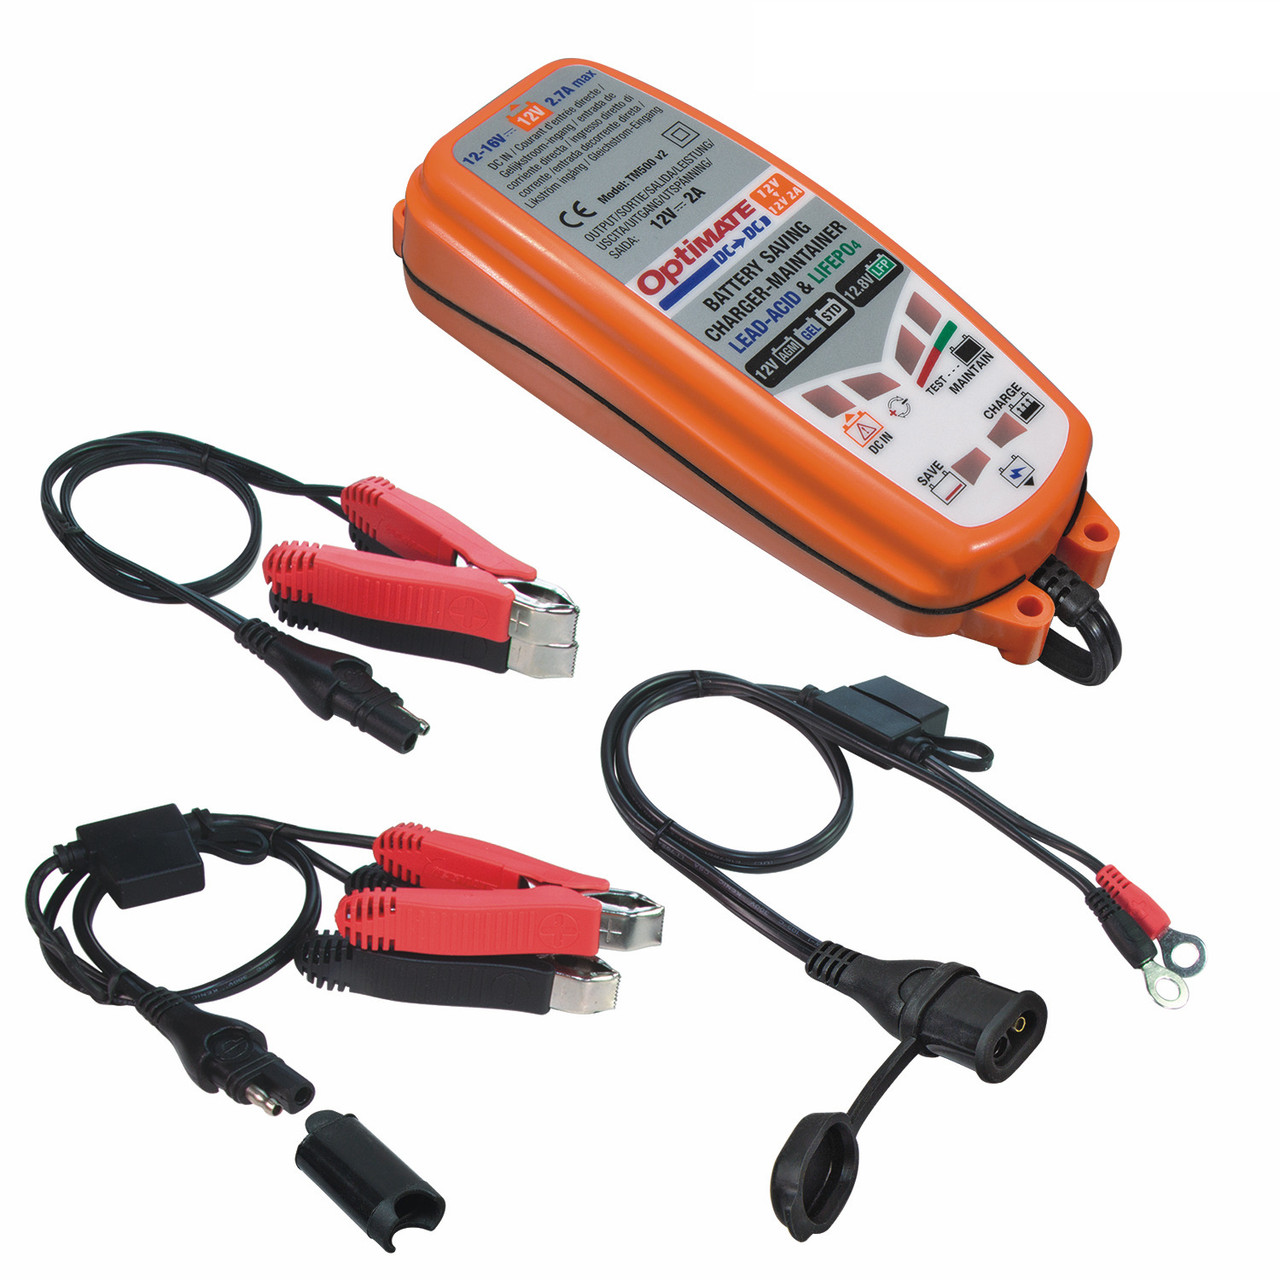 OptiMate 6 Lithium 12V Battery Charger — Motorcycle Performance Store